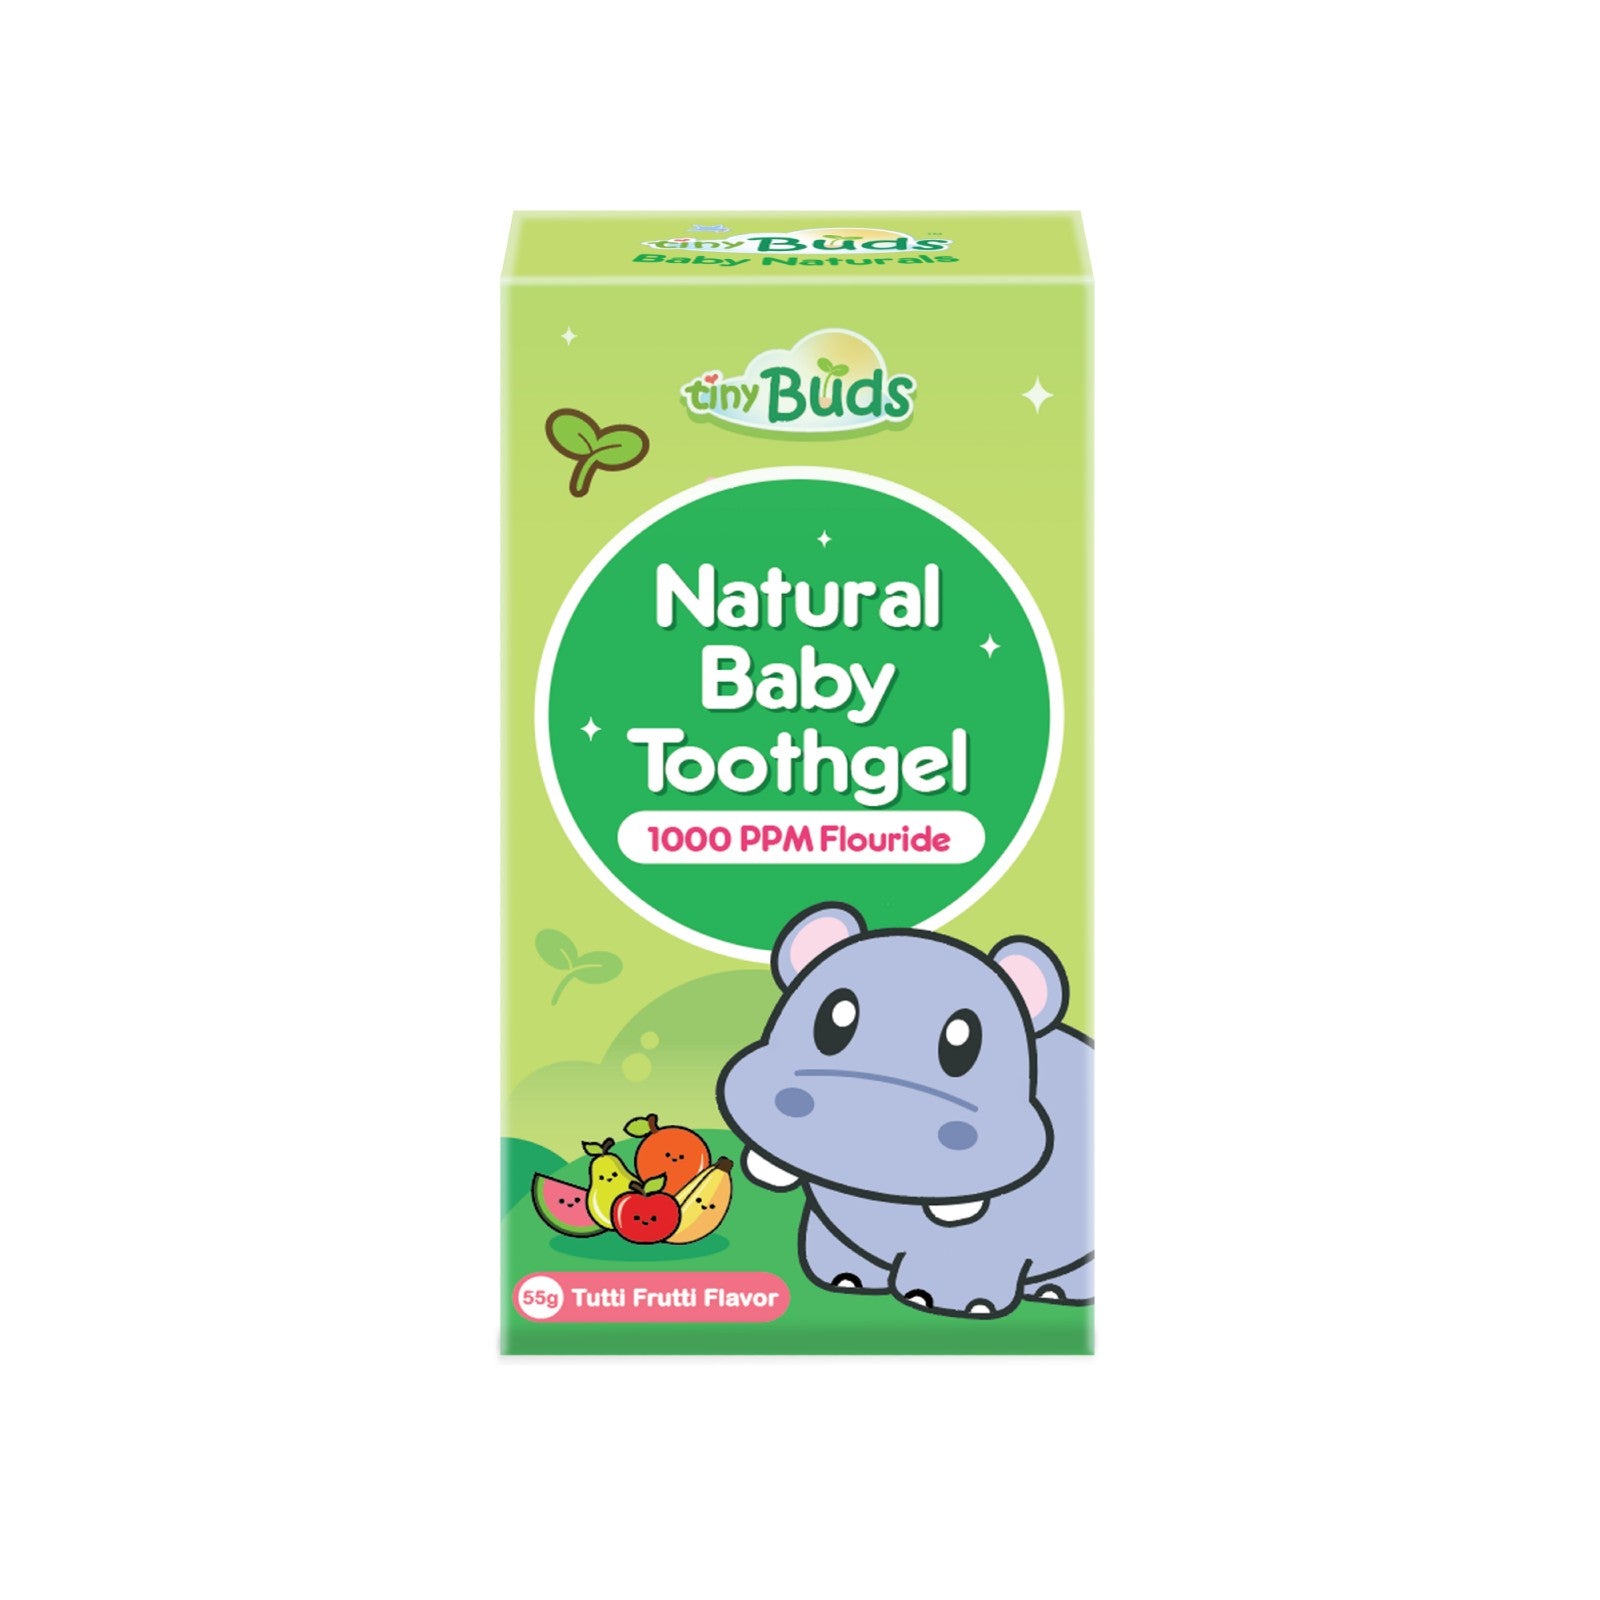 Tiny Buds Toddler Training Toothpaste - Stage 2 Tutti Frutti